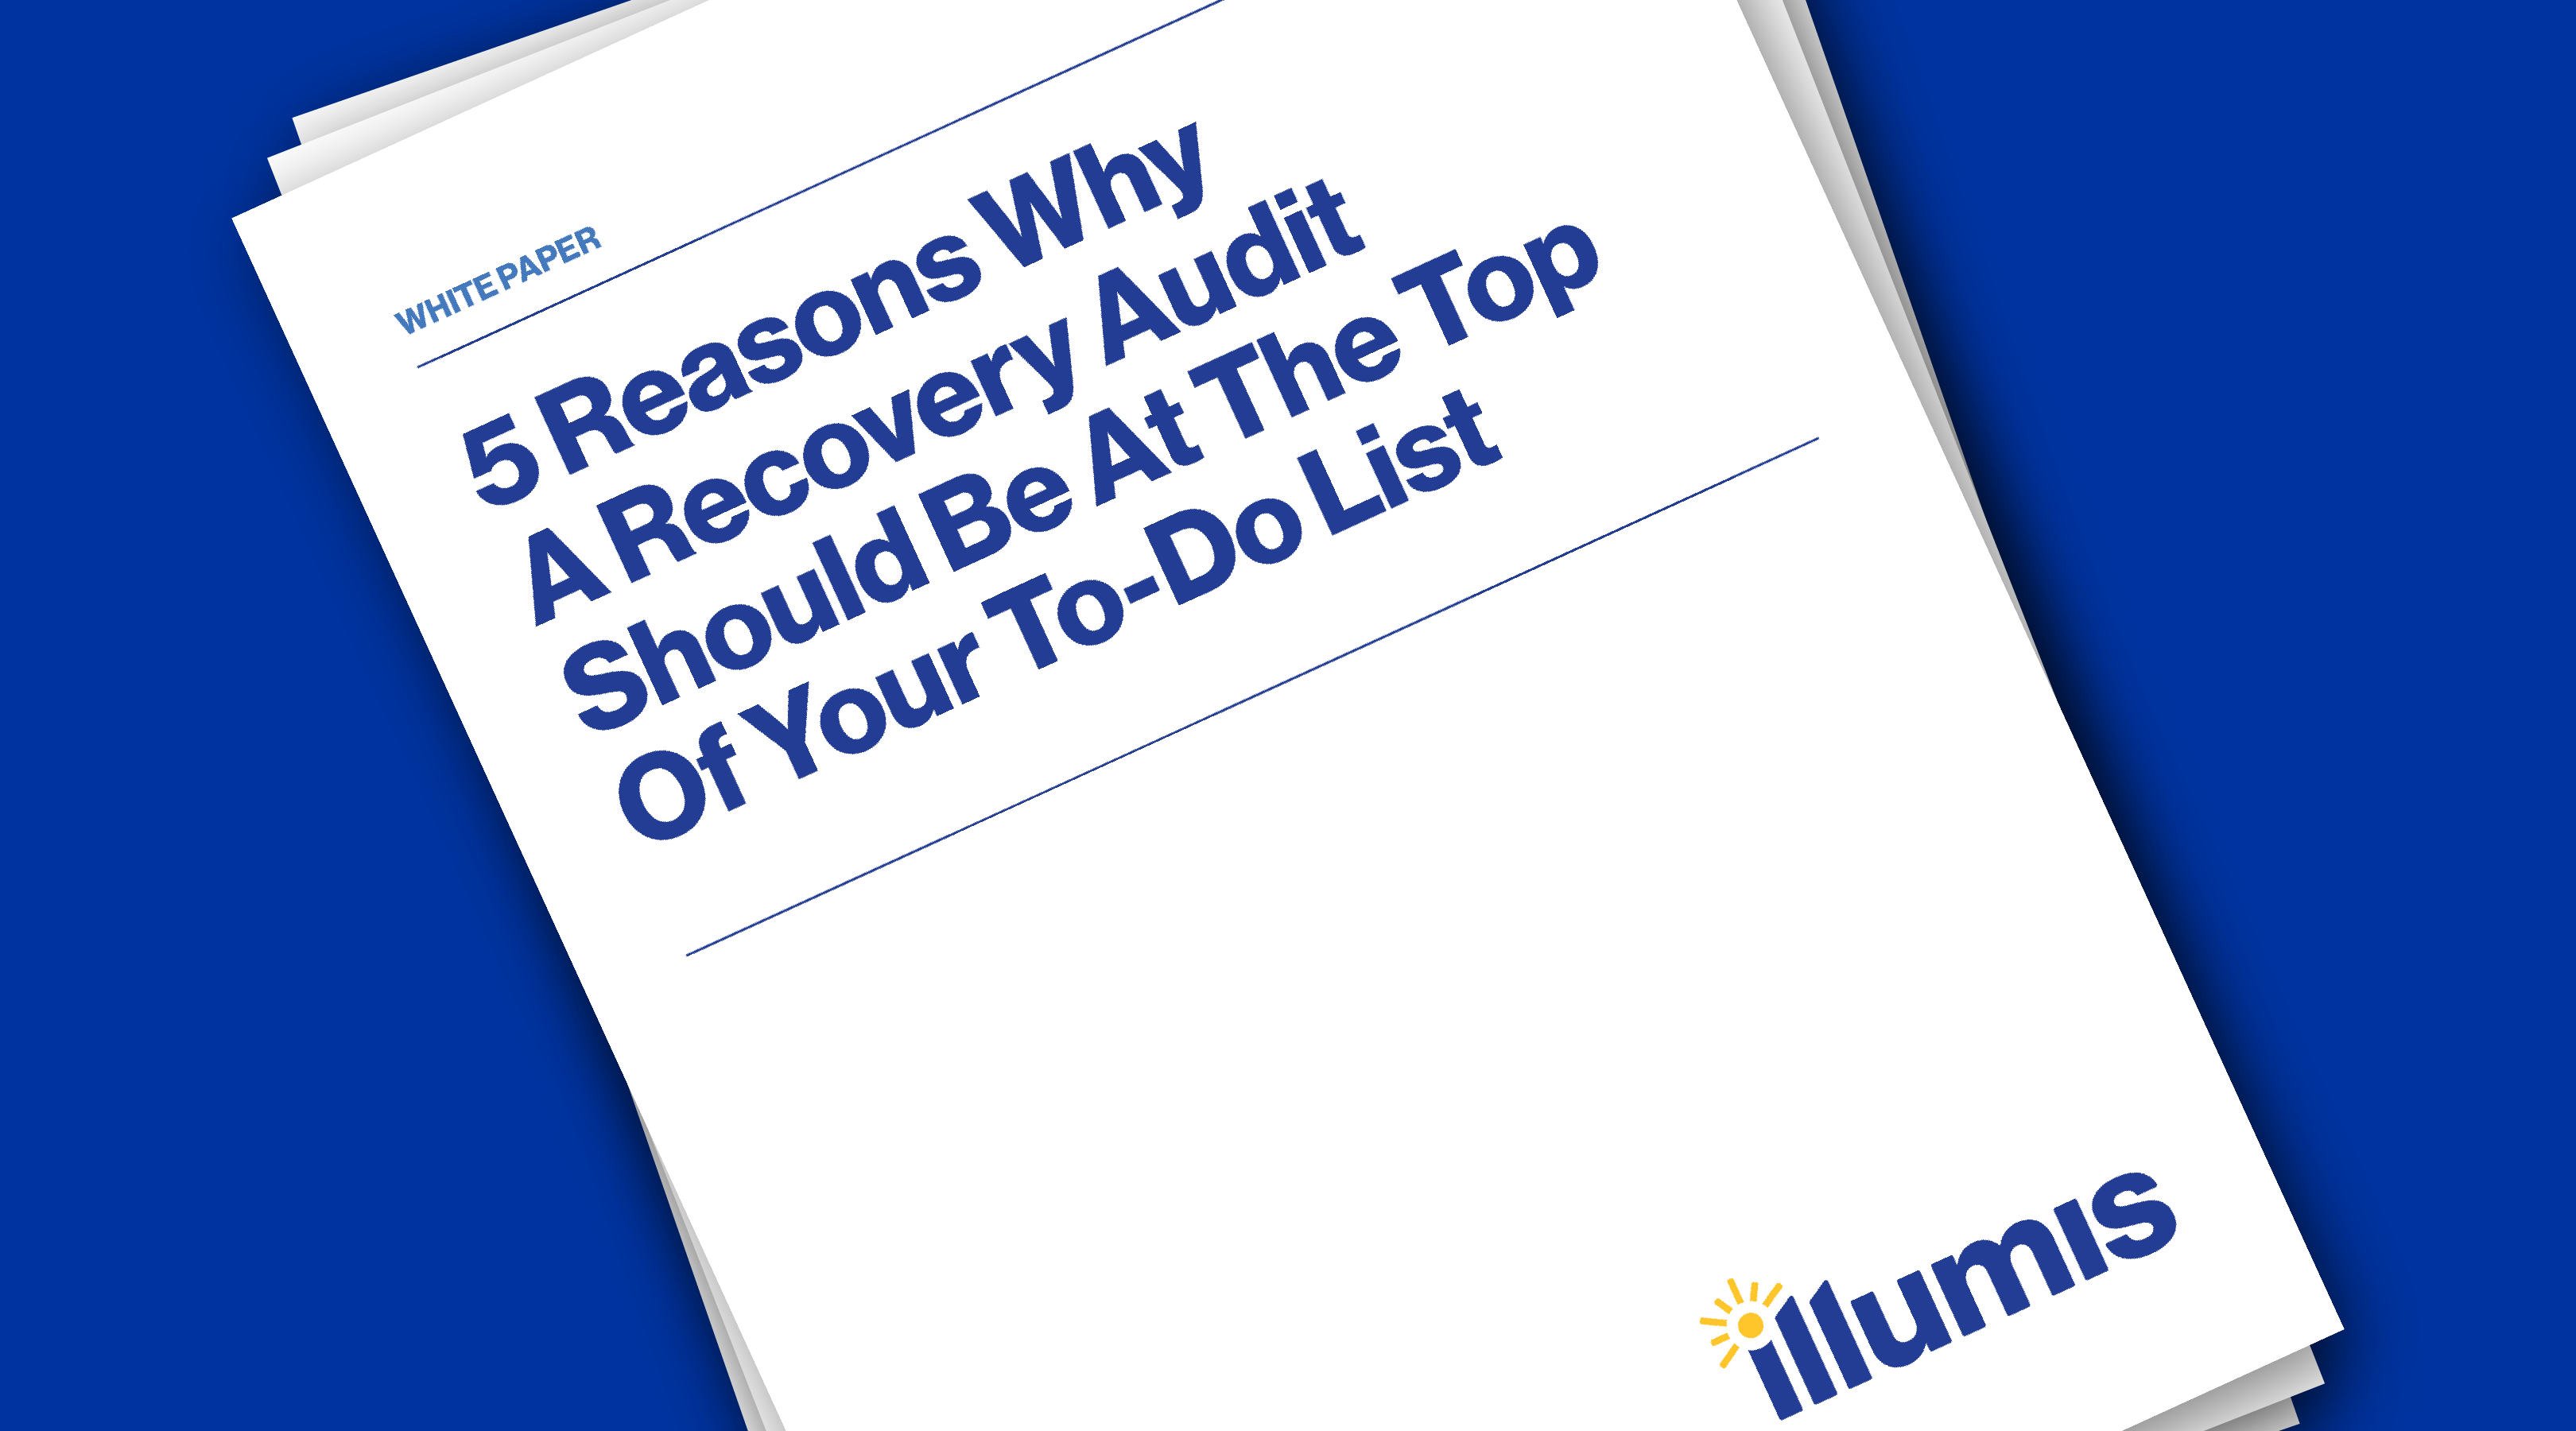 5 Reasons Why a Recovery Audit Should Be at the Top of Your To-Do List — Illumis Global recovery audit services and business intelligence in finance